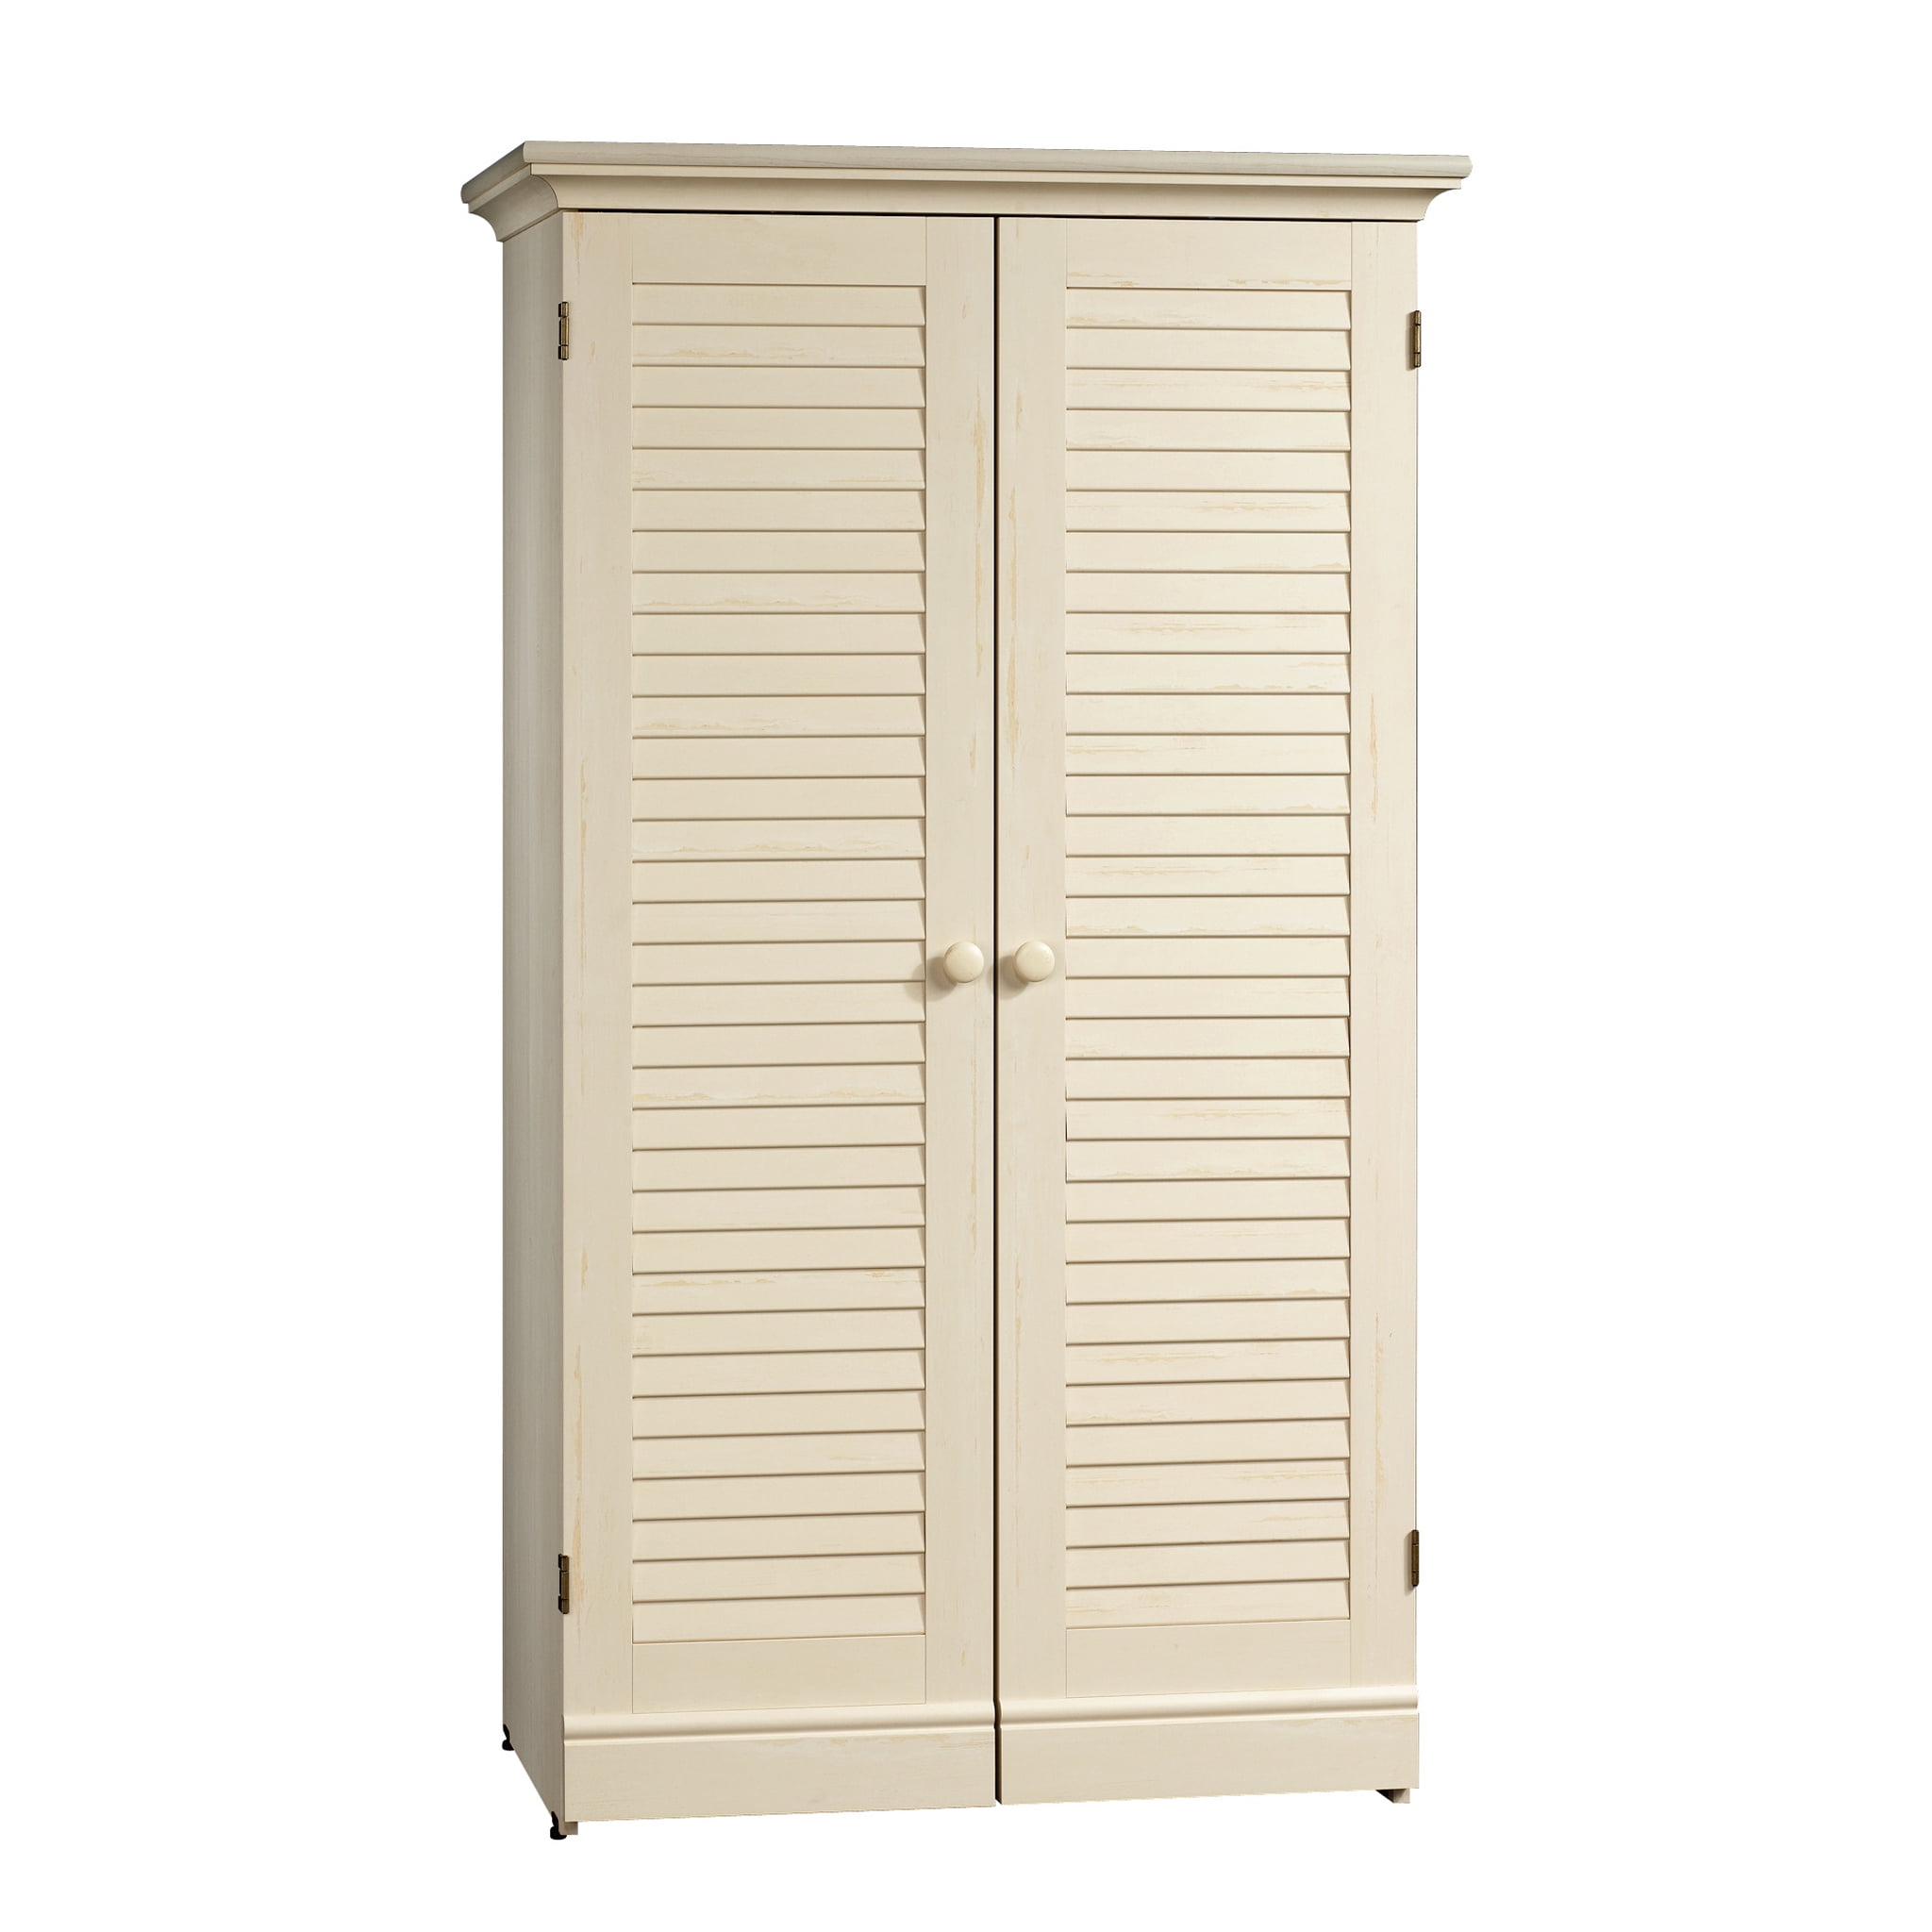  Sauder Miscellaneous Storage Craft & Sewing Armoire, L